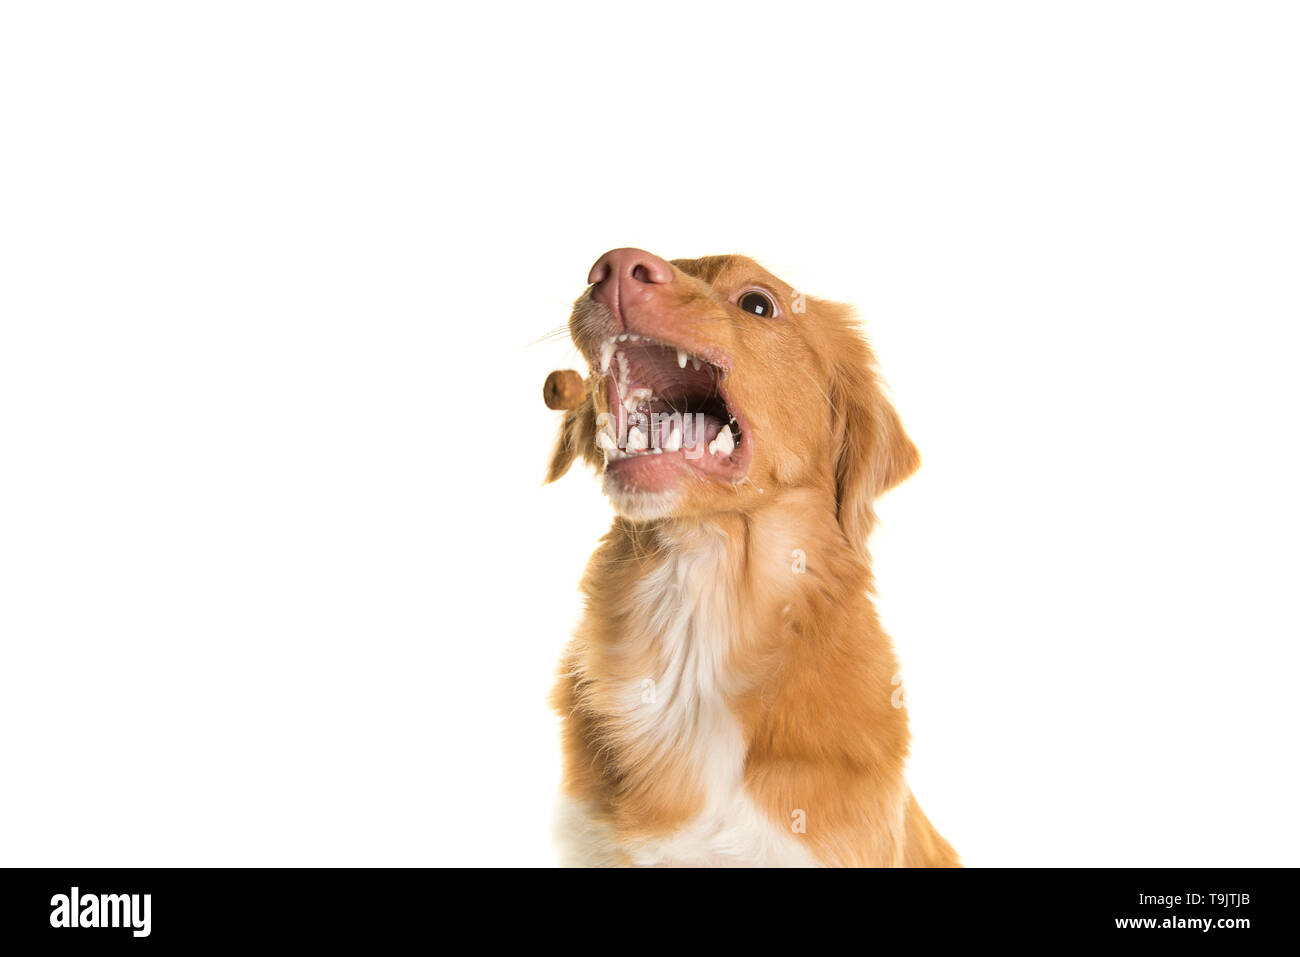 Portrait of a Toller dog catching food with mouth wide open isolated on a white background Stock Photo